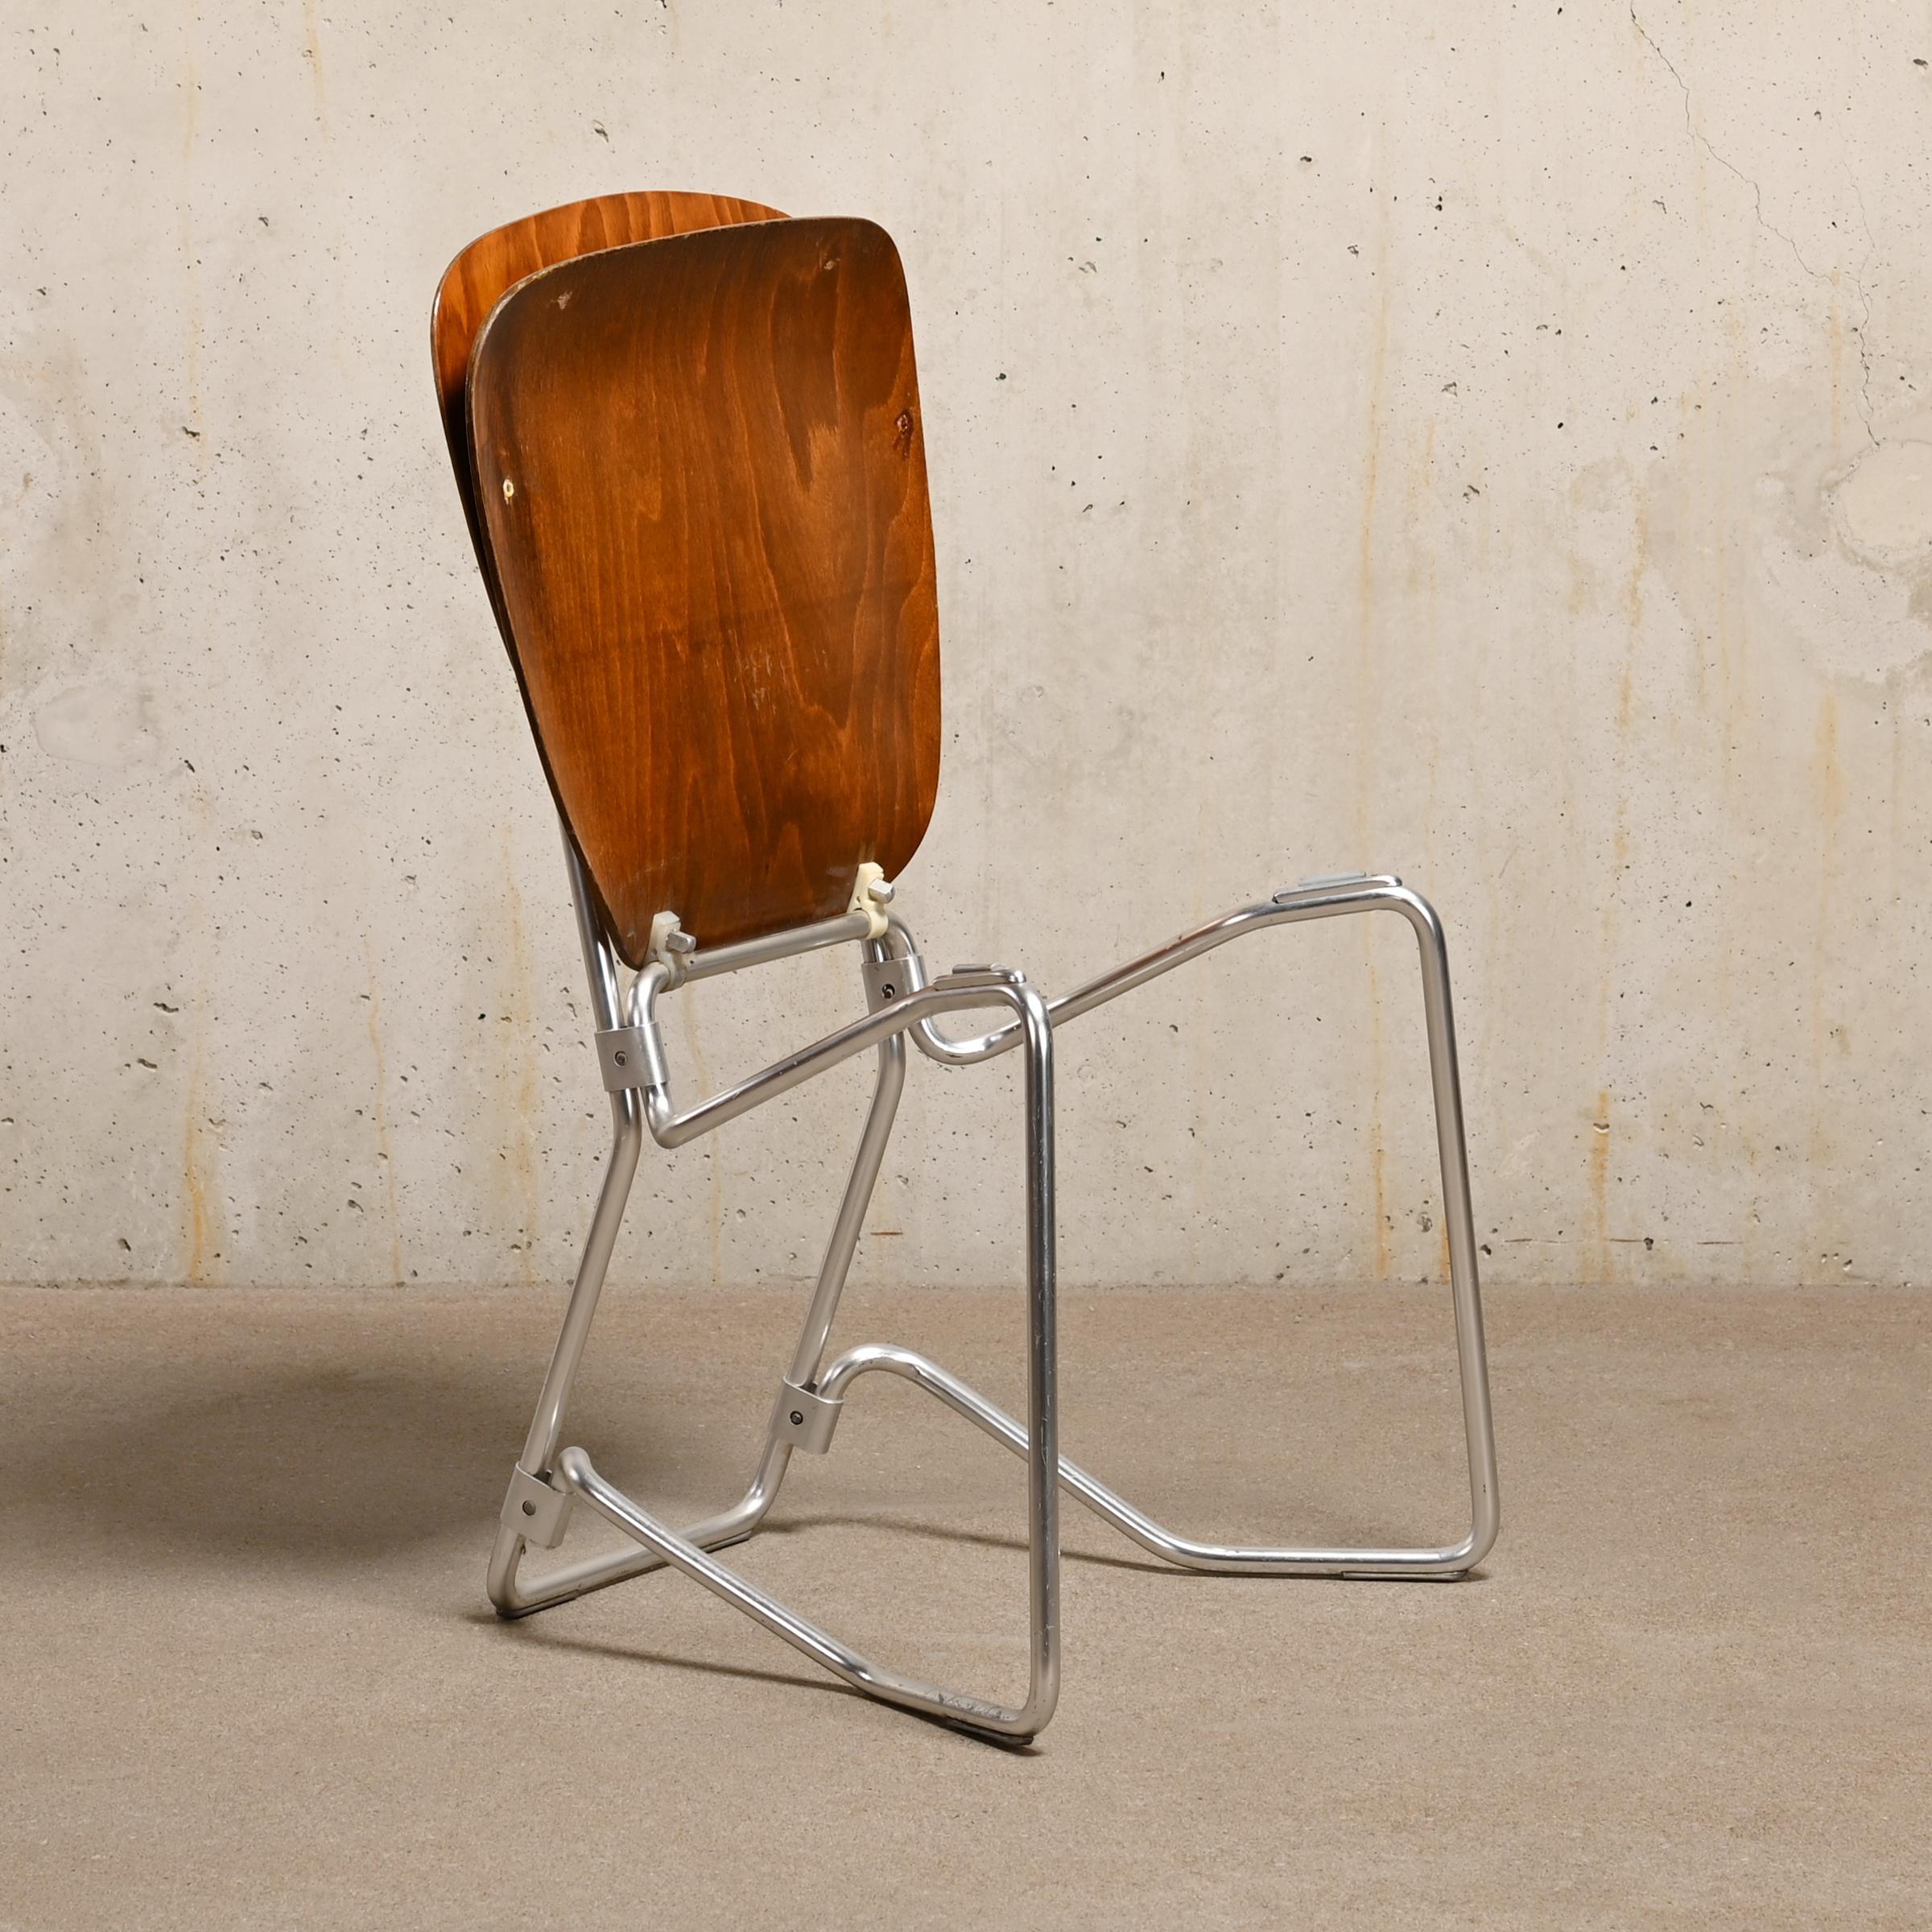 Mid-20th Century Armin Wirth Aluflex Folding Chairs in stained plywood for Philipp Zieringer KG